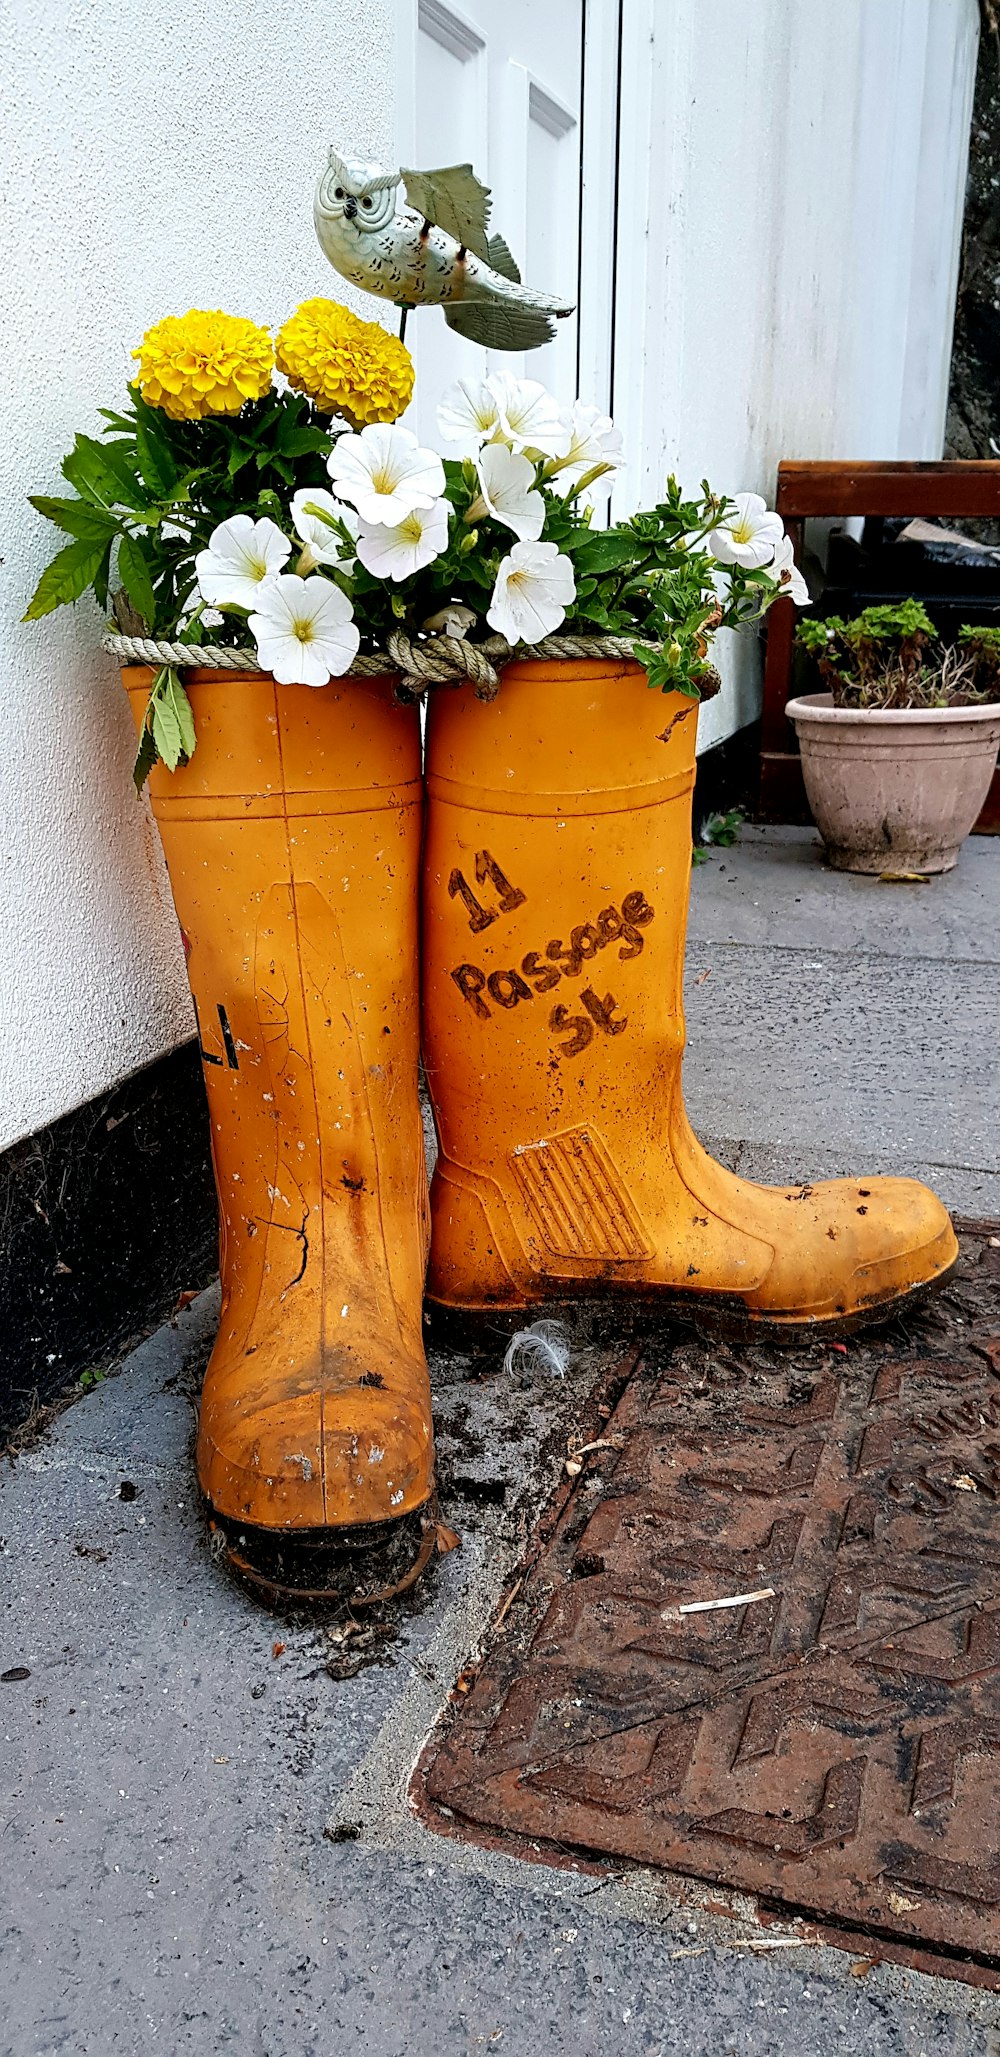 a pair of yellow rubber boots with flowers in them